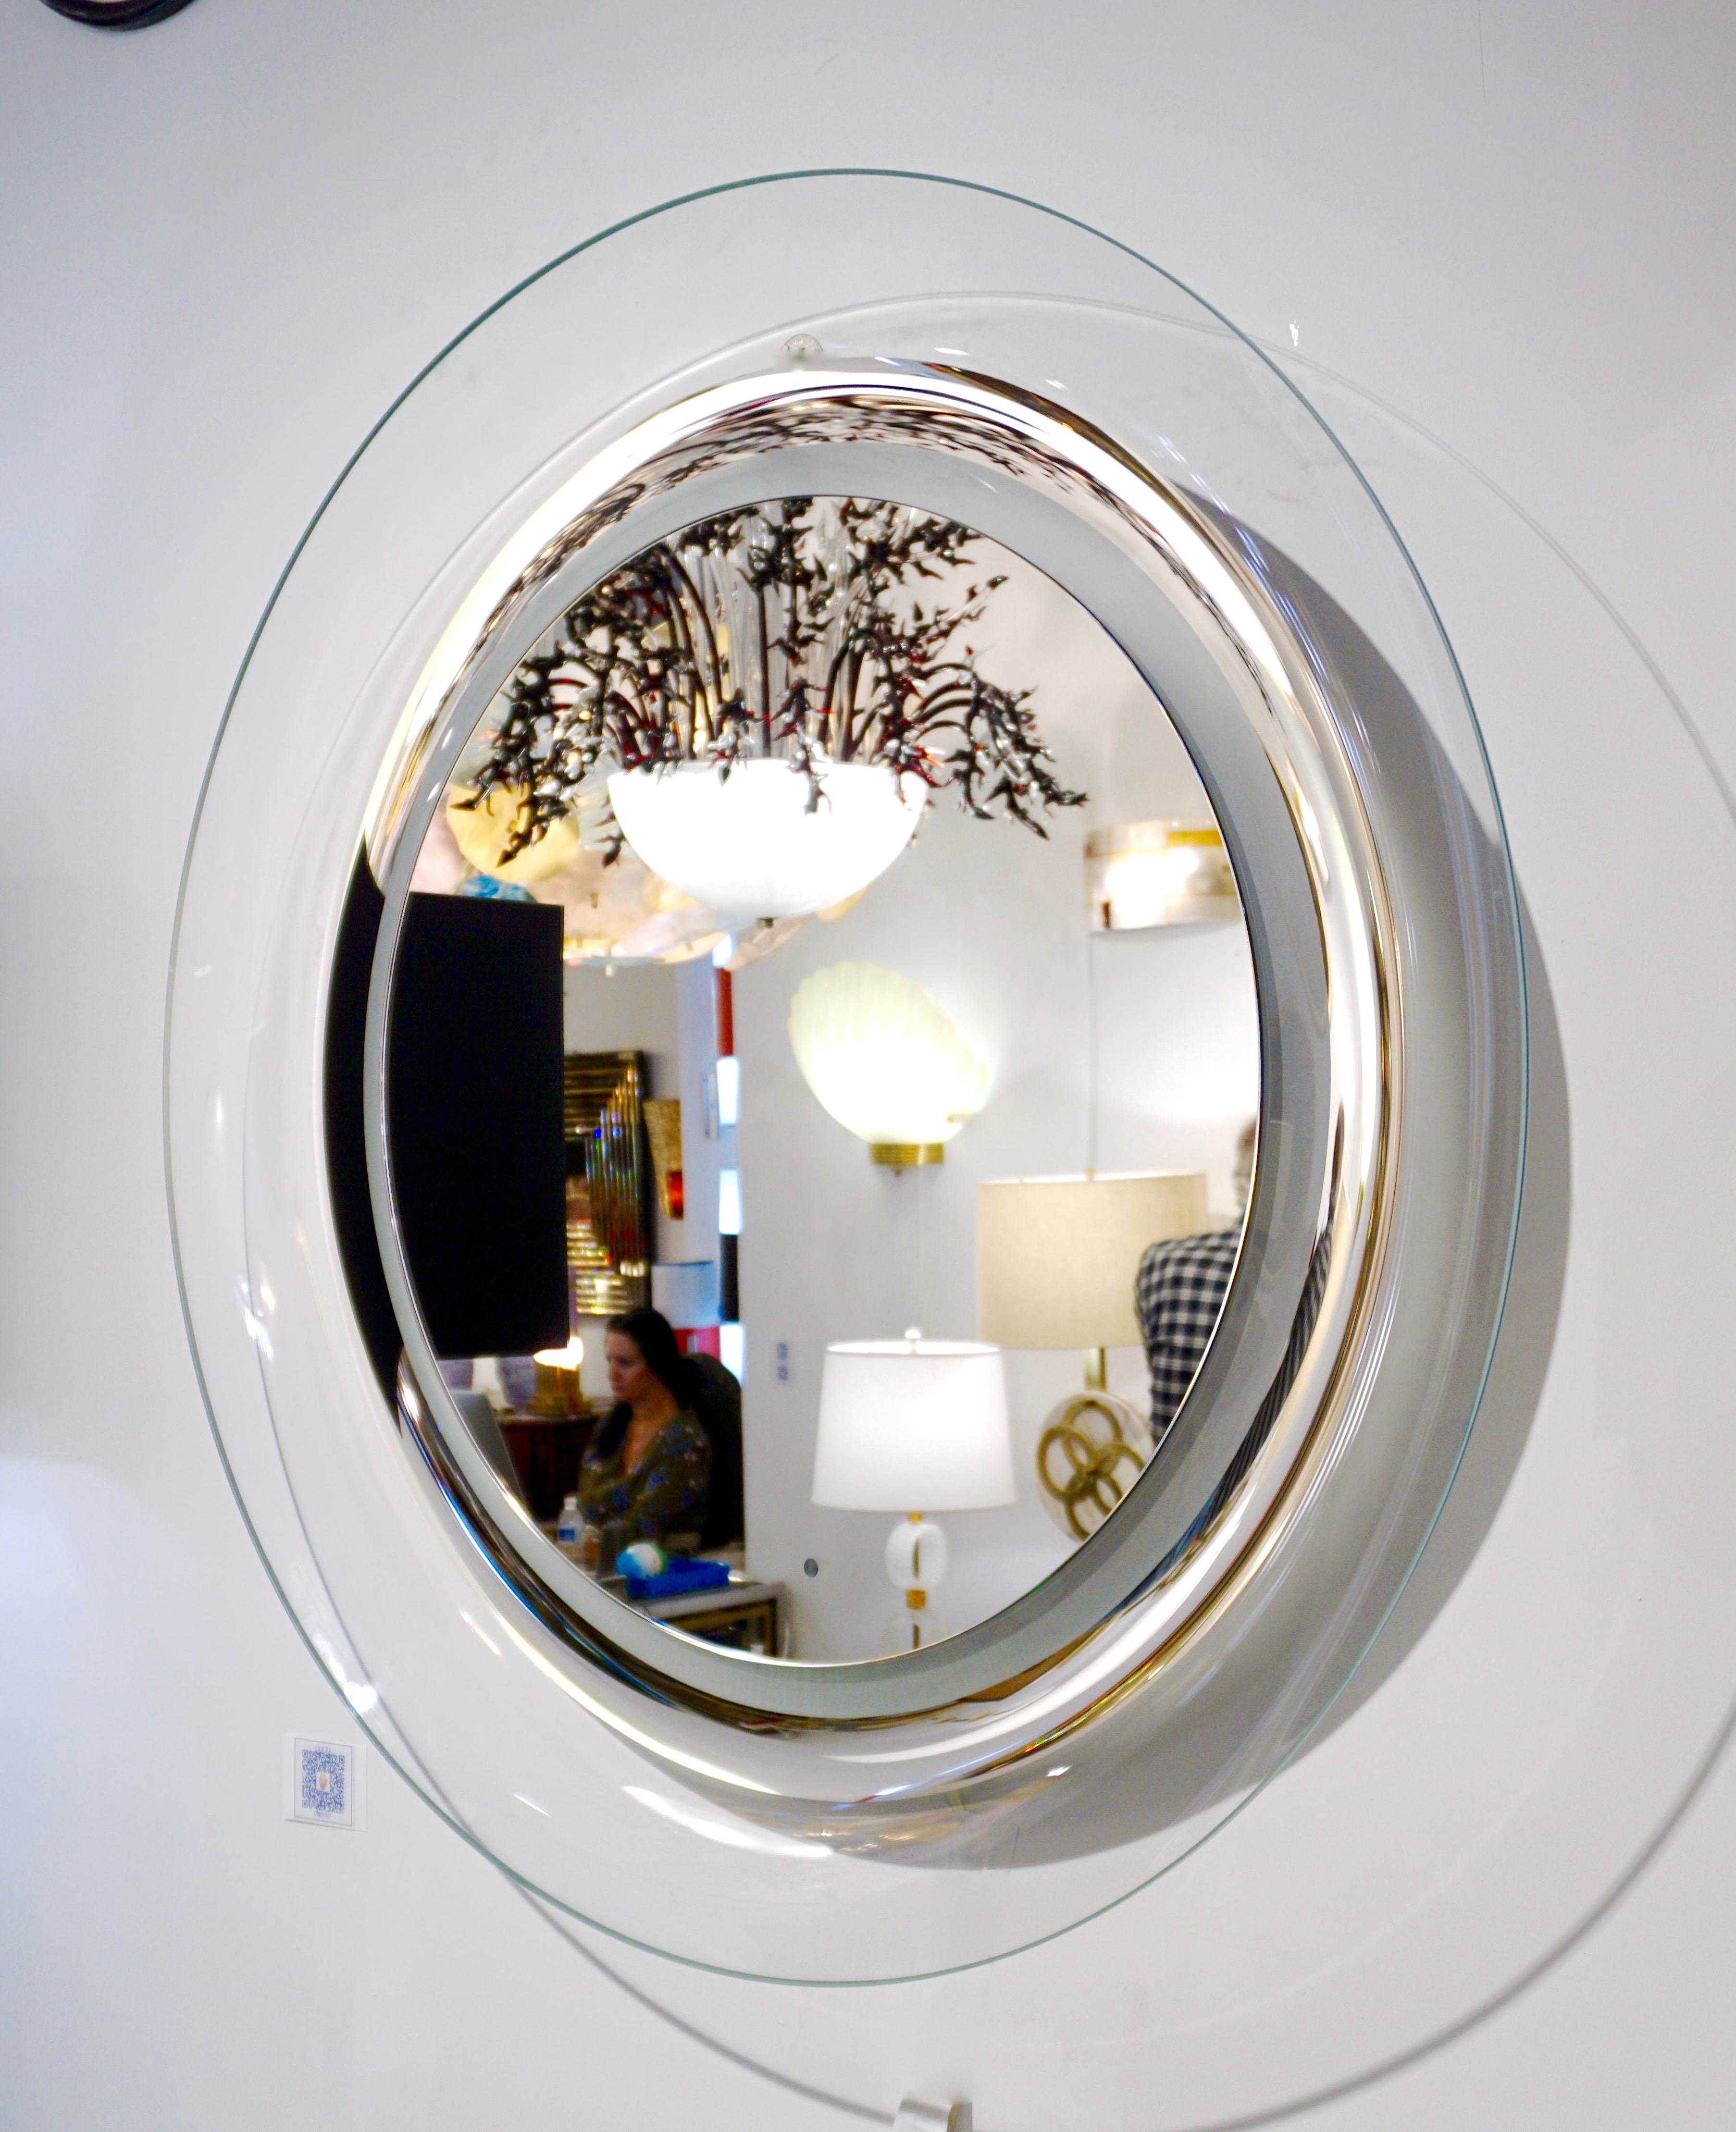 Made in Italy, modern minimalist round mirror, entirely handcrafted, of high-quality execution: the organic convex frame is in clear curved glass, decorated with silver mirror and frosted glass strips surrounding the fitted flat mirror raised in the